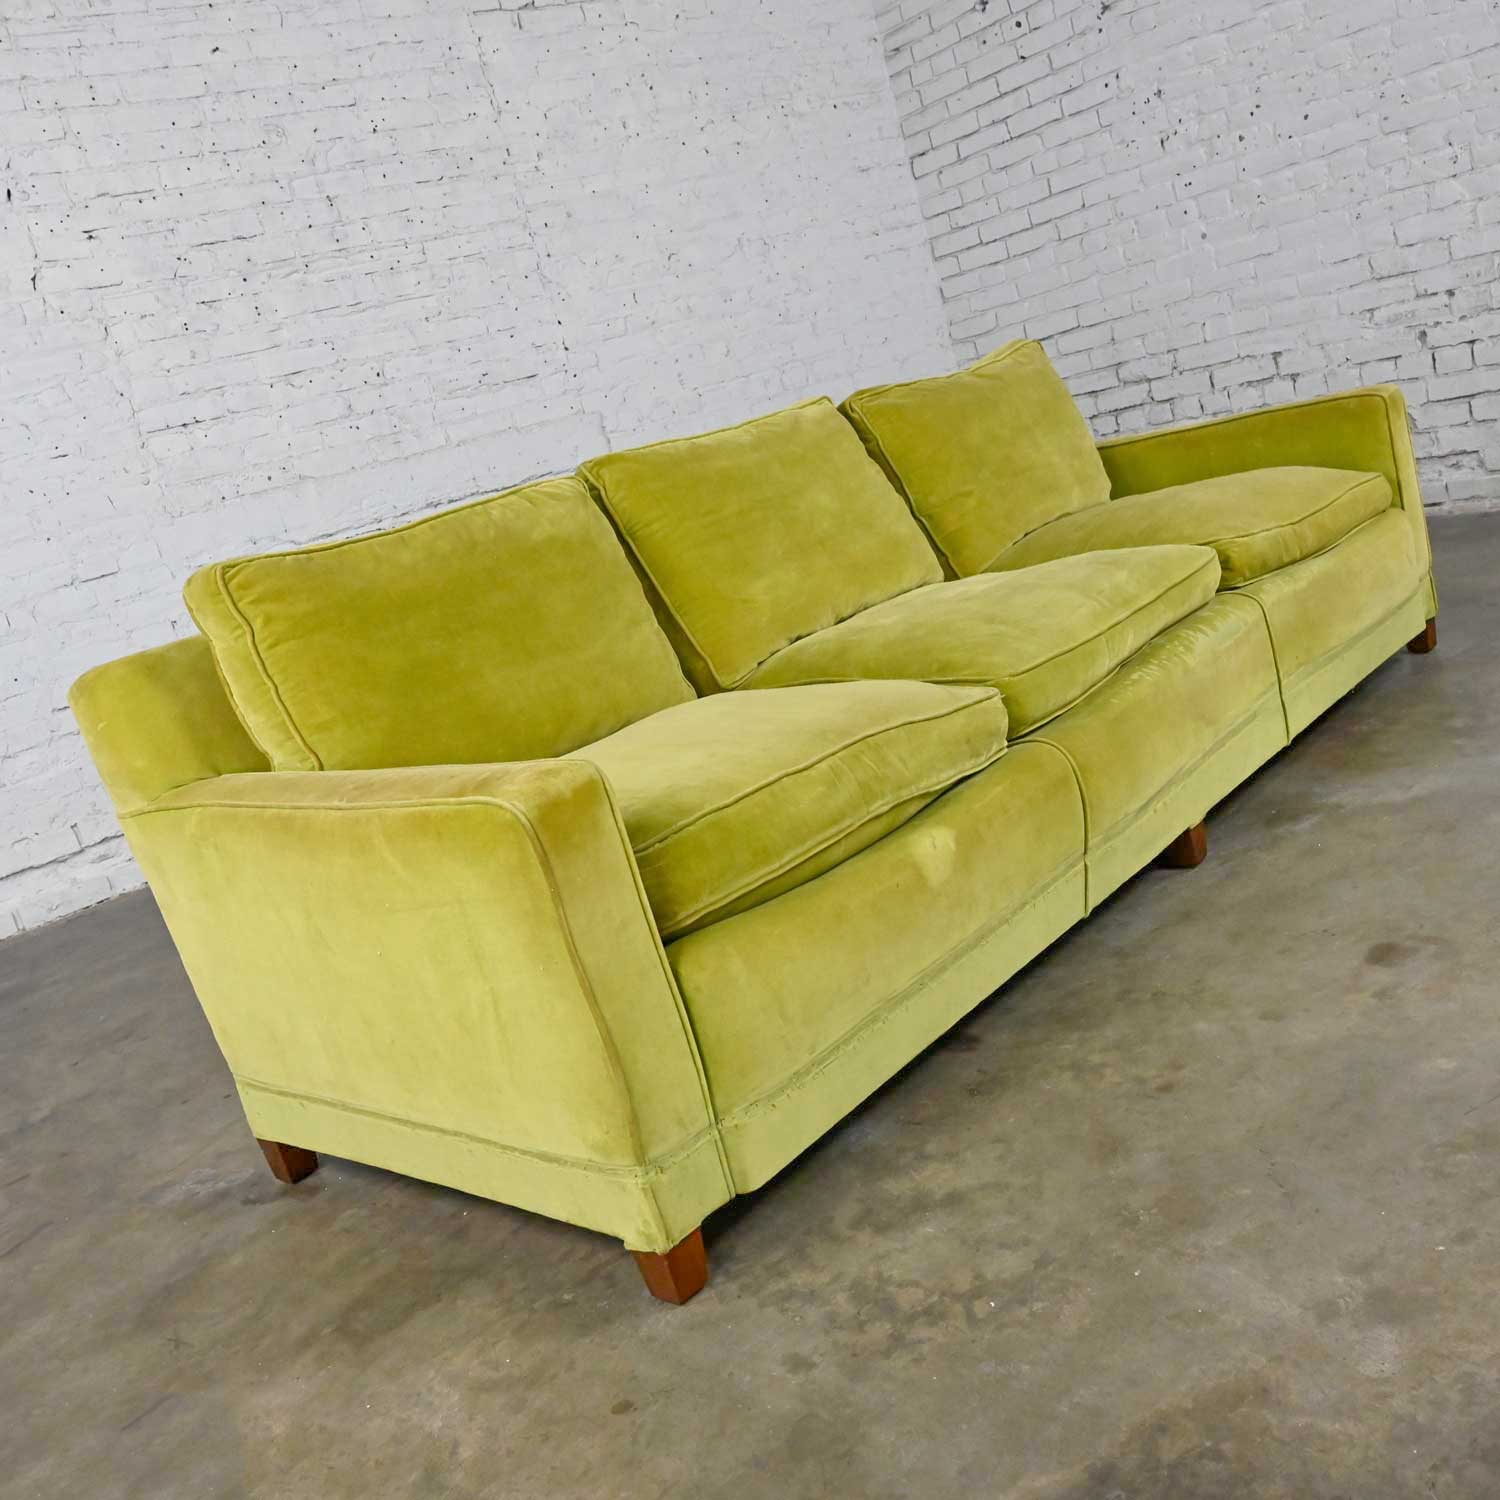 Vintage Mid-Century Modern Feather Filled Green Velvet Lawson Style Sofa Frame Only Needs Upholstered